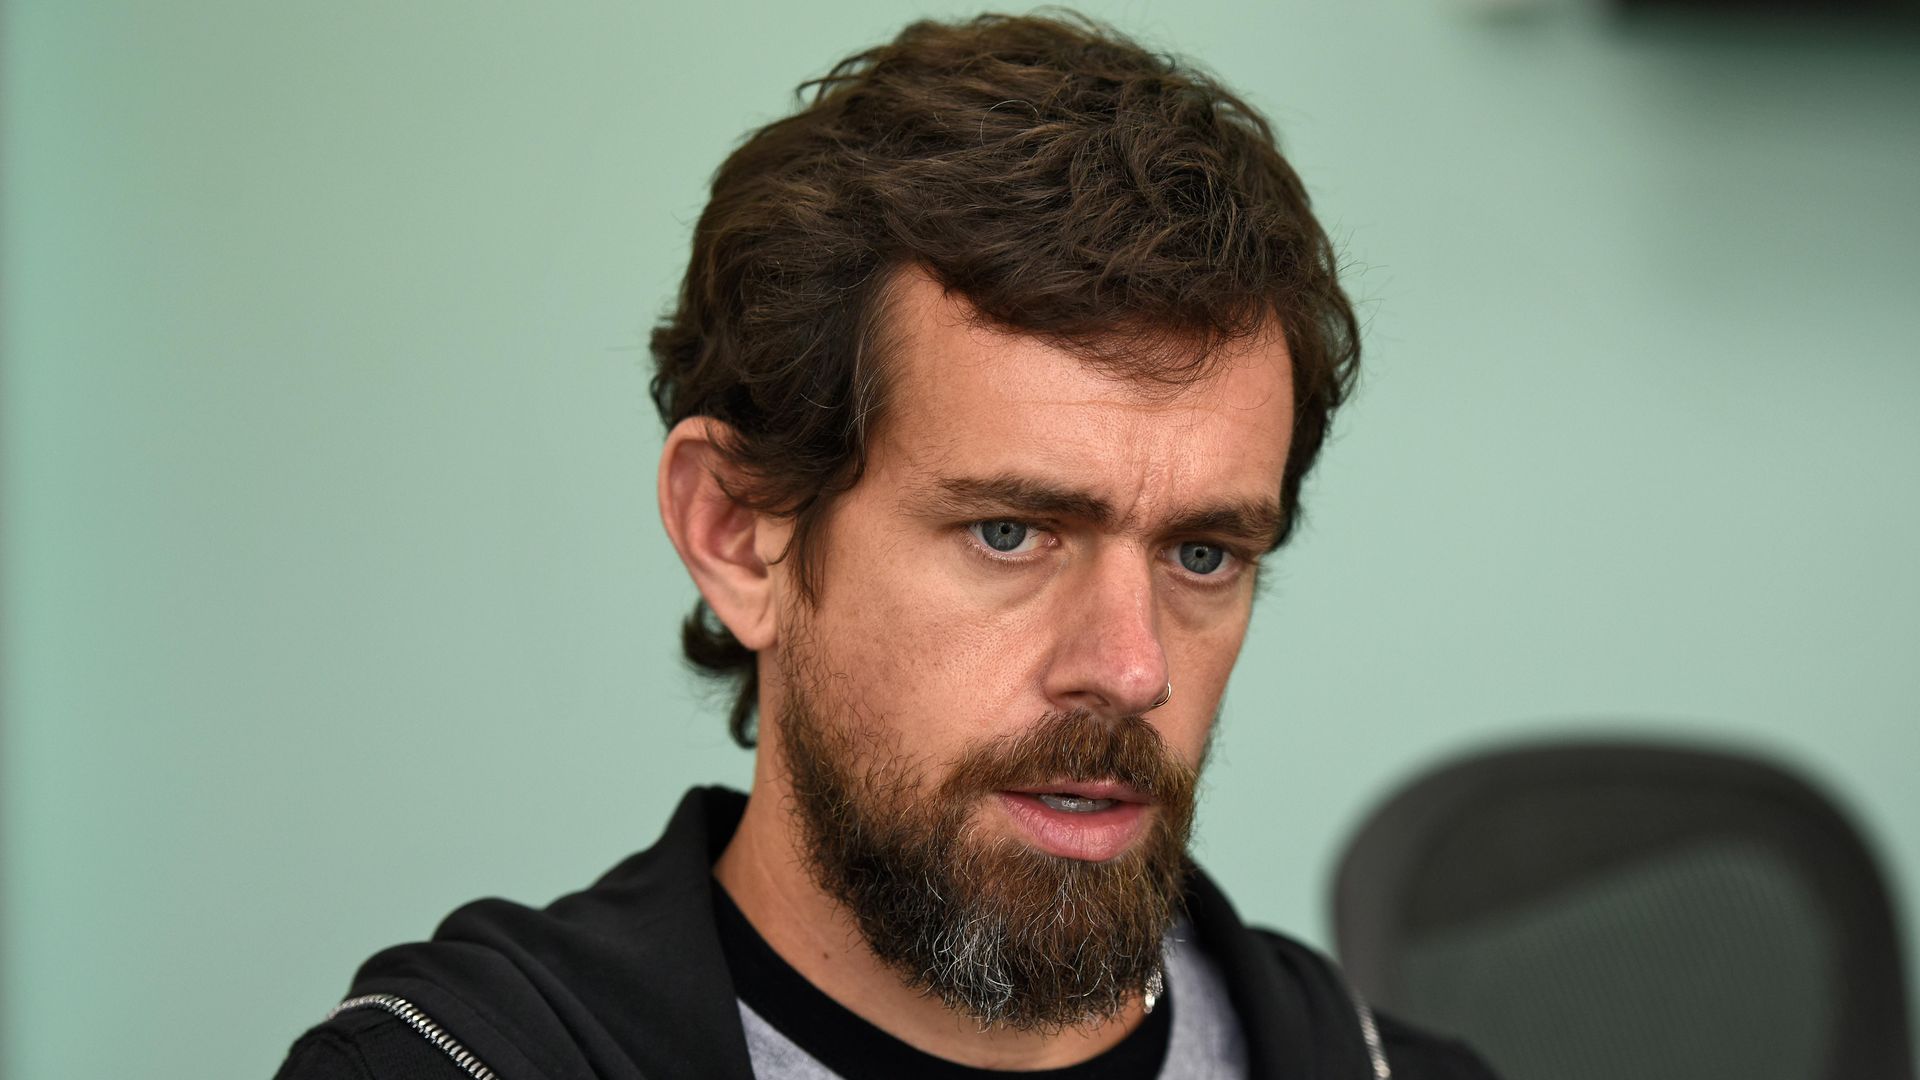 In this image, Dorsey is speaking while wearing a shirt and a hoodie.